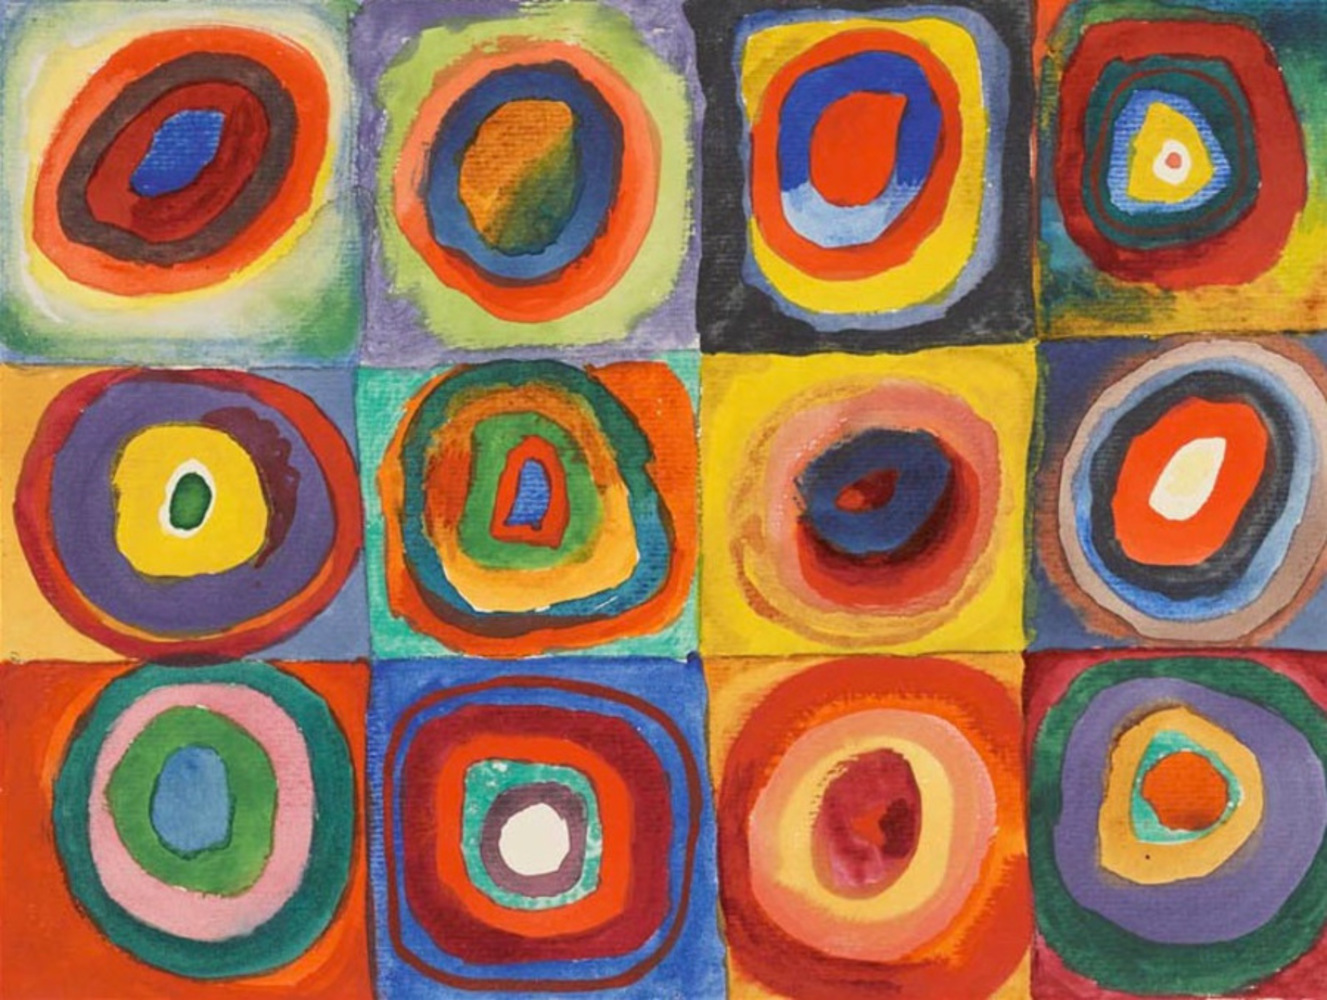 Vassily kandinsky  1913   color study  squares with concentric circles.thumb